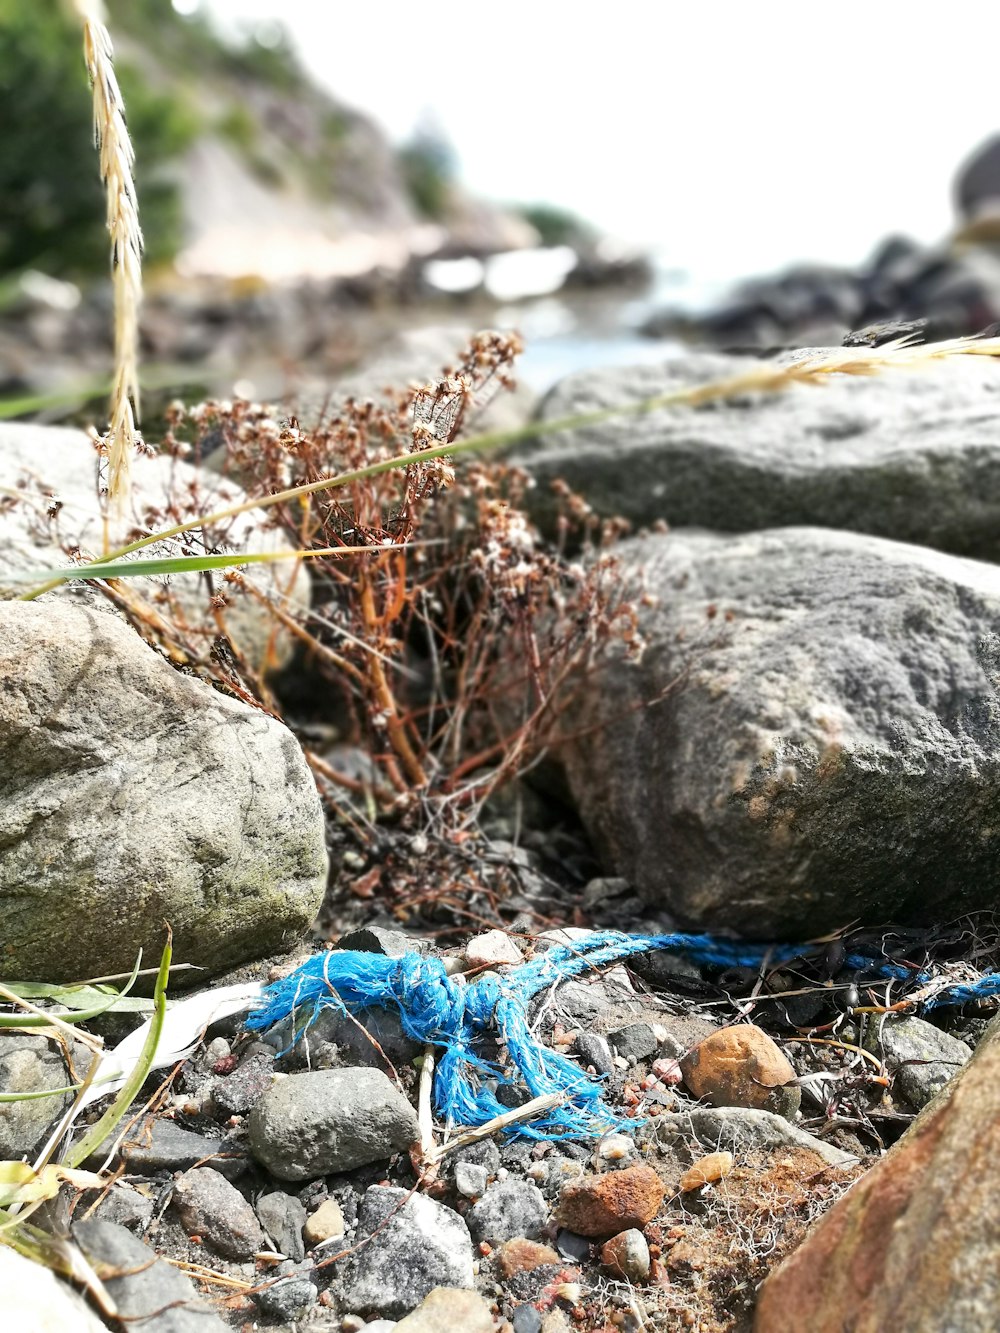 a blue rope is tied to some rocks